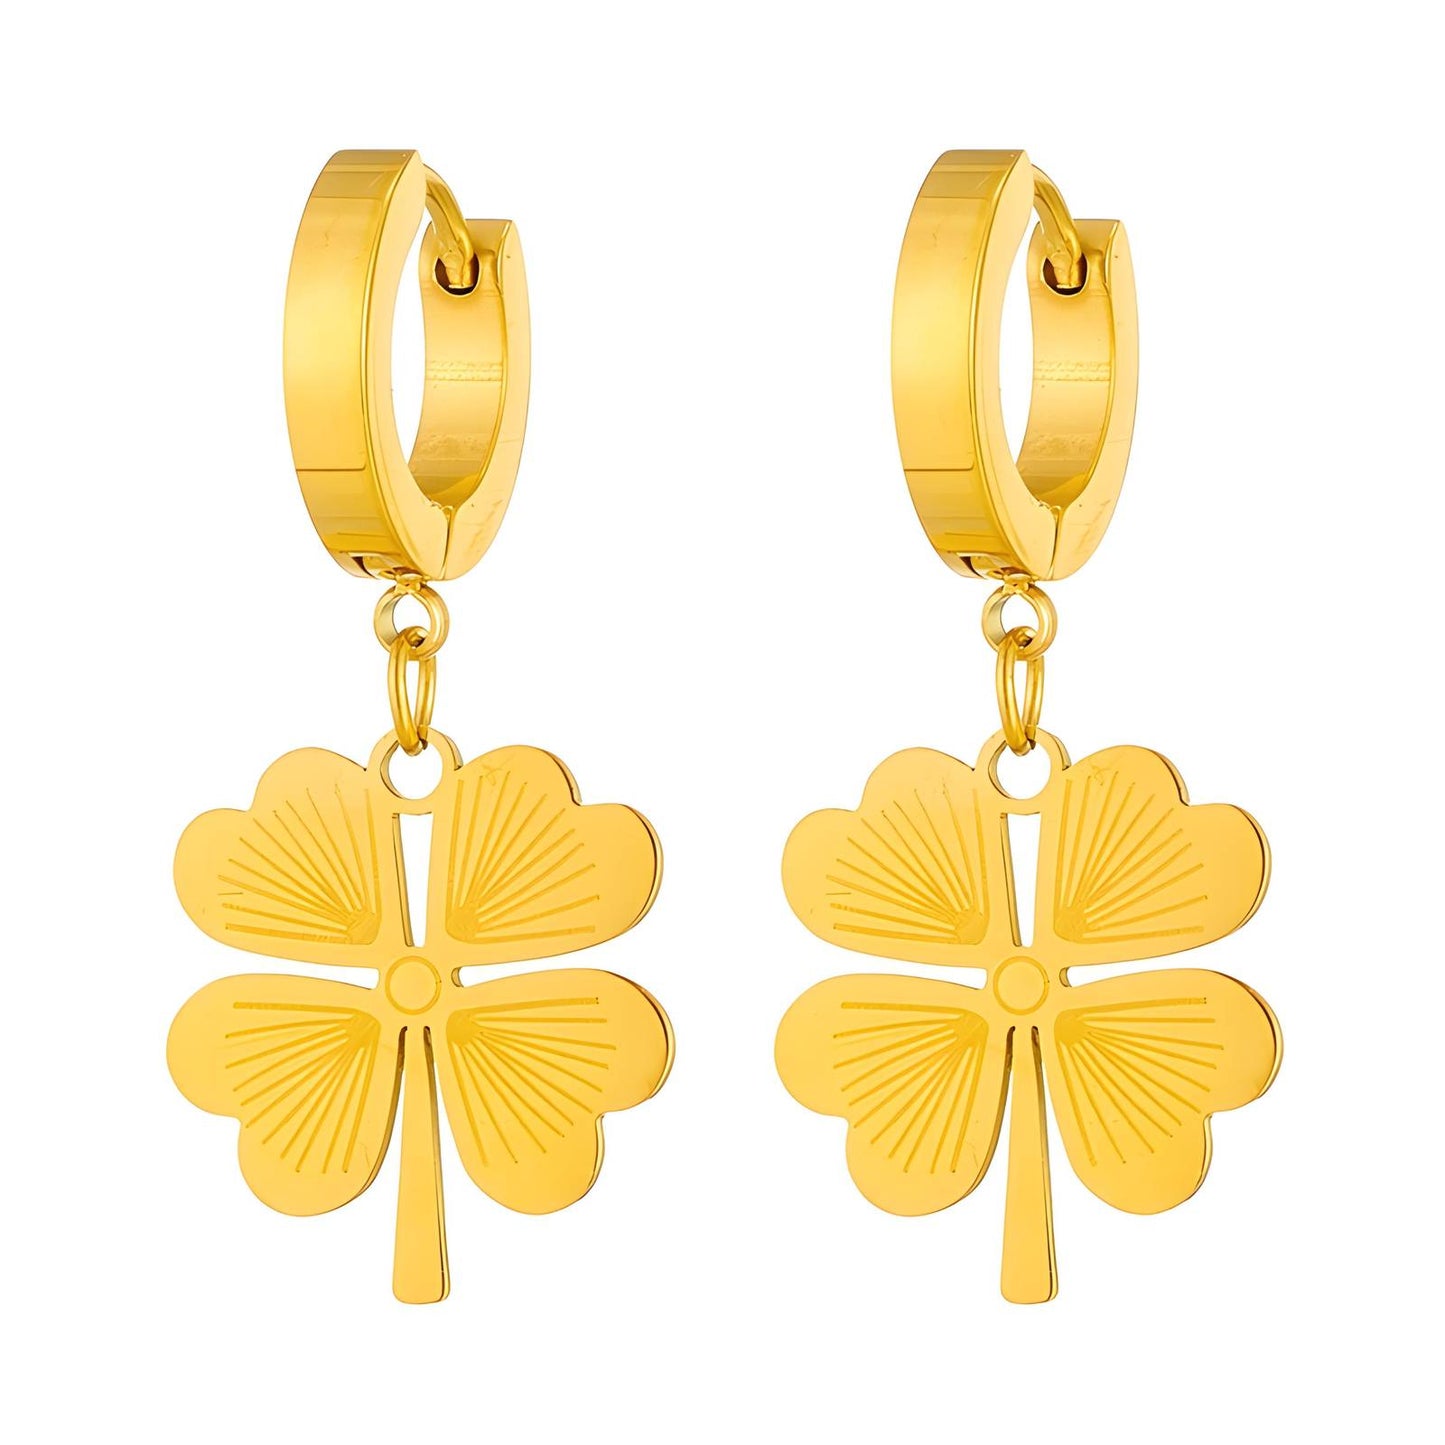 18K gold plated Stainless steel  Four-leaf clover earrings, Intensity